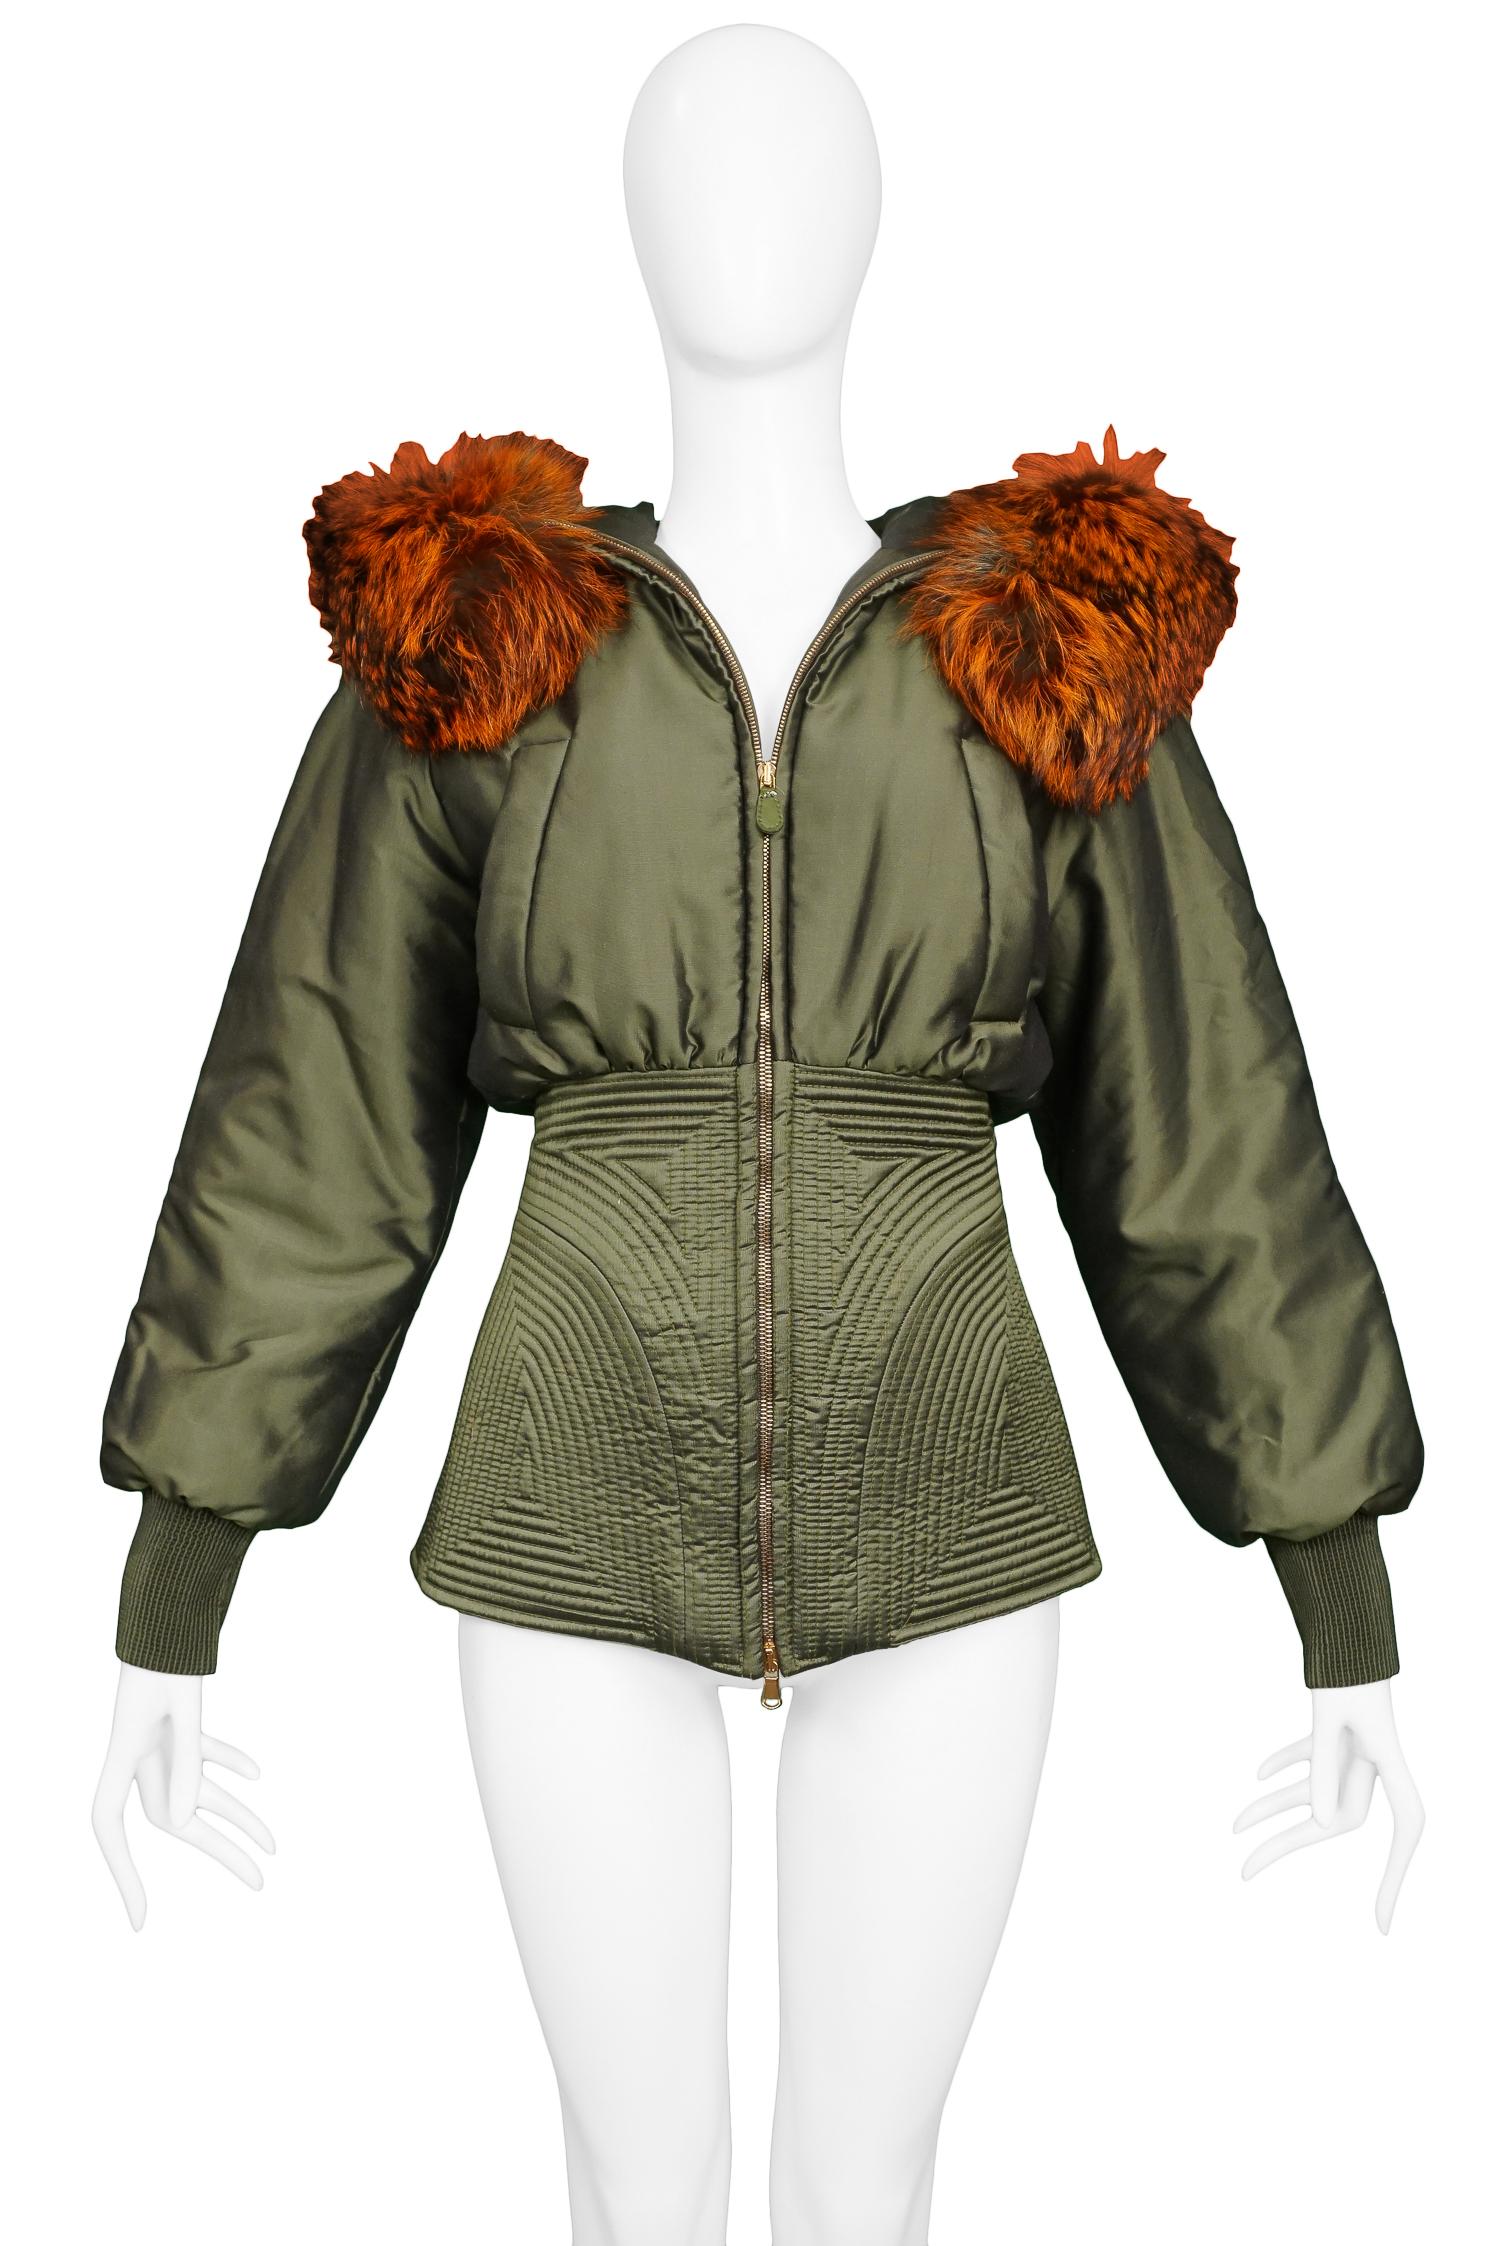 Vintage Alexander McQueen Military Fox Fur Hood Bomber 2007 In Excellent Condition For Sale In Los Angeles, CA